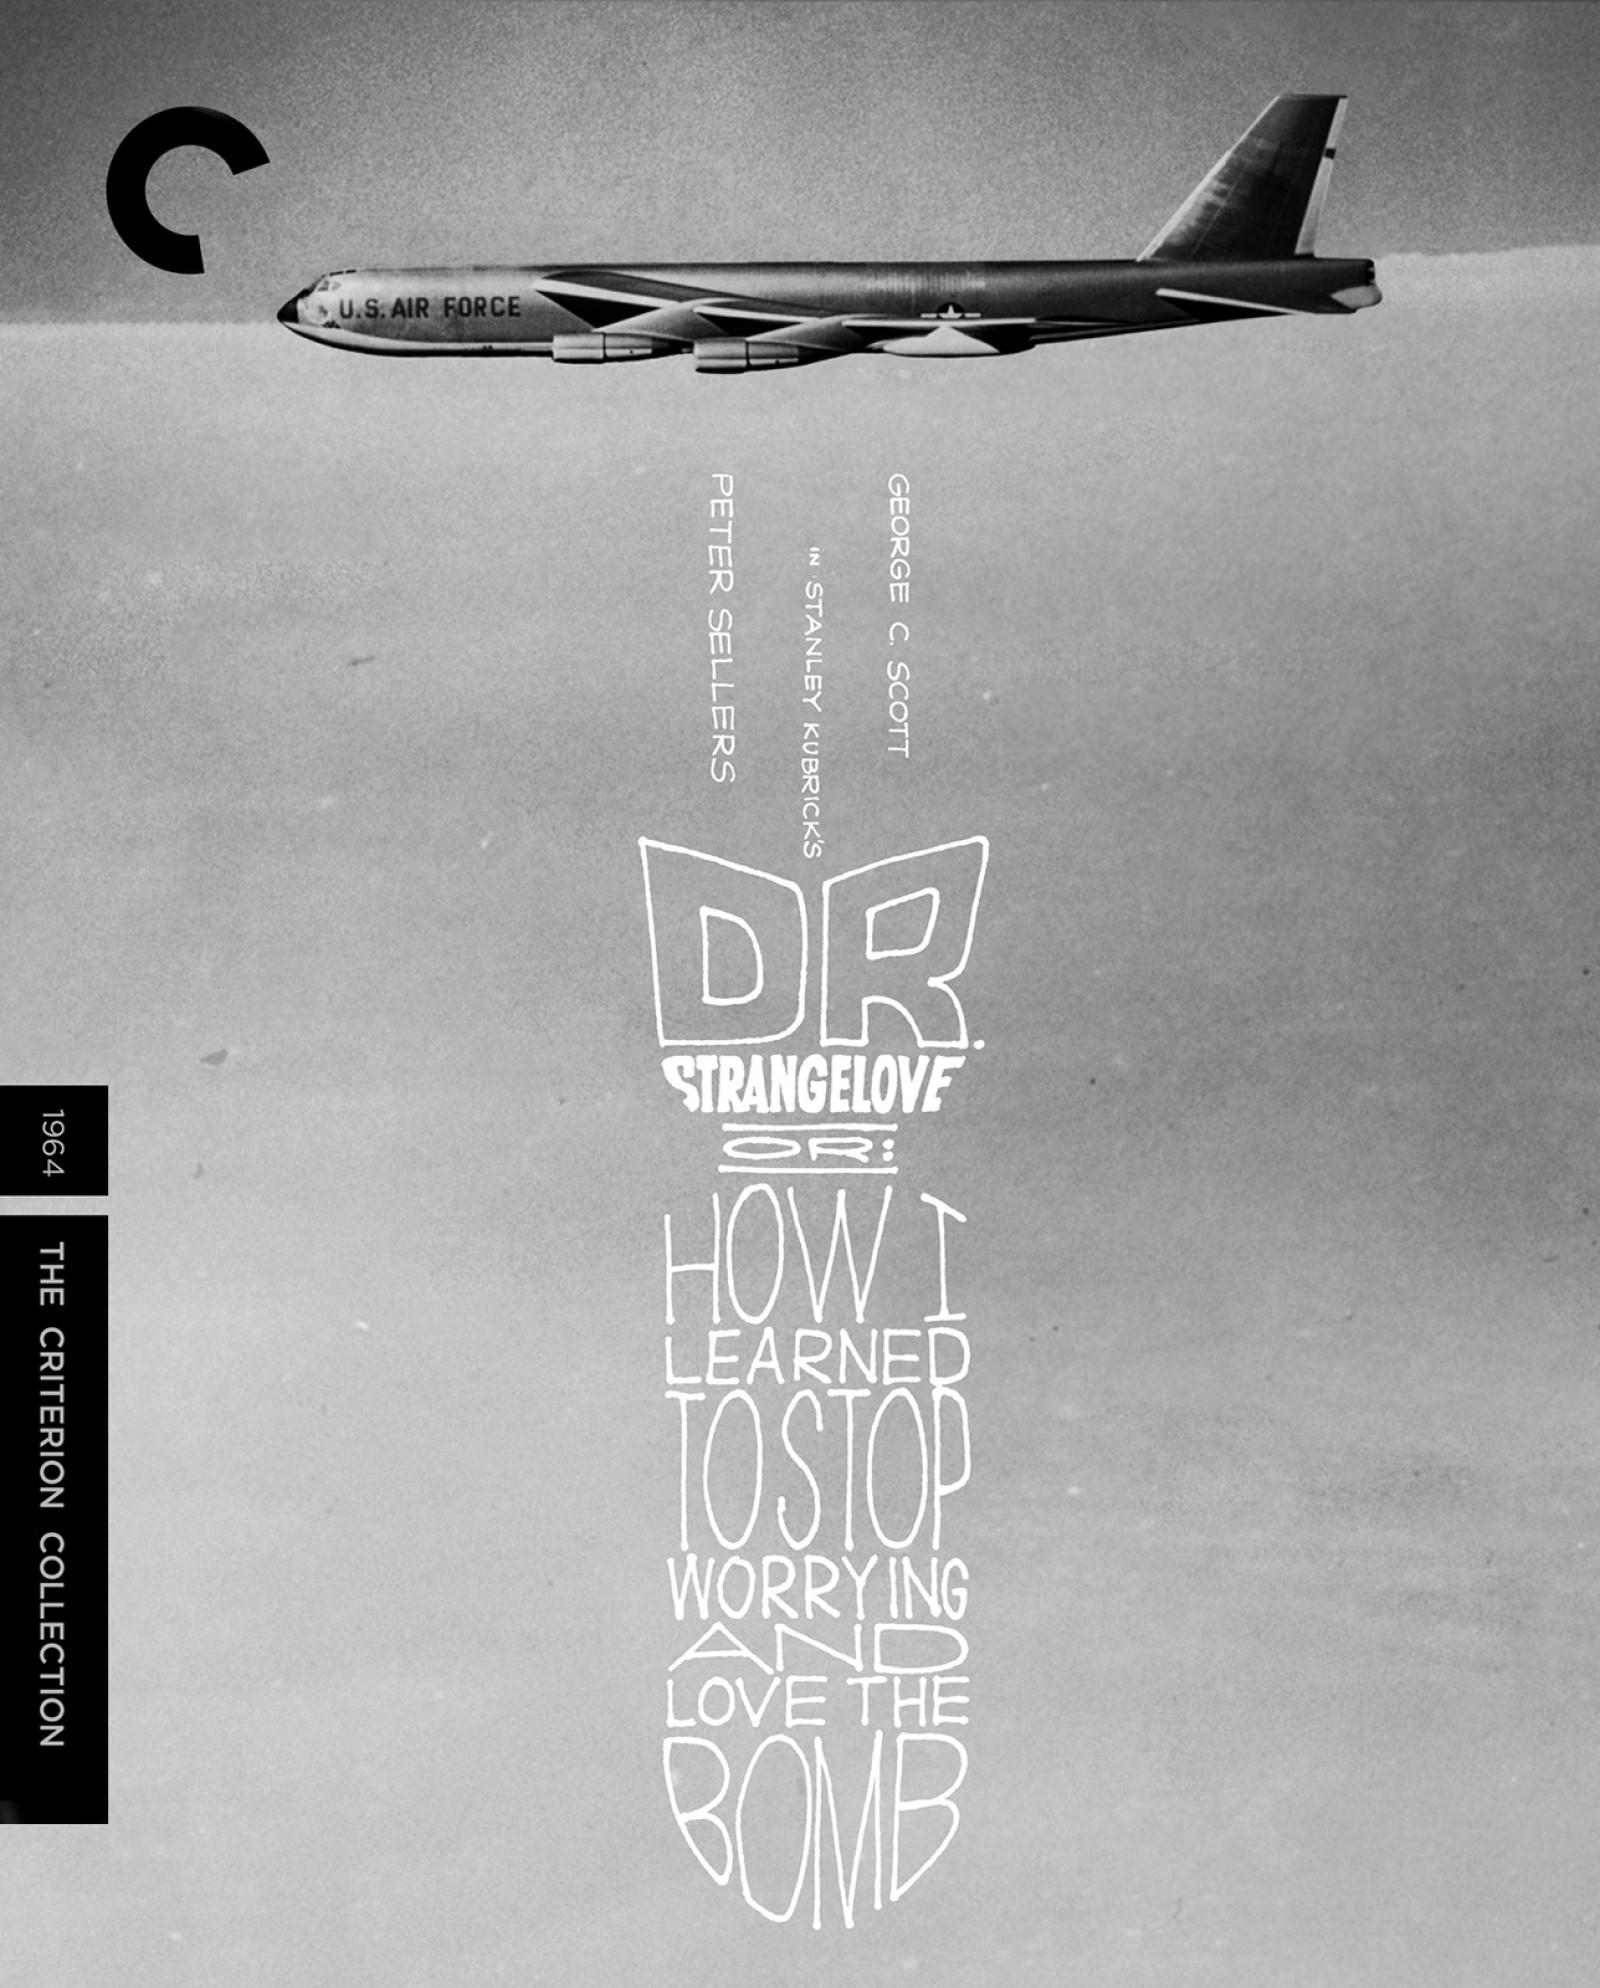 Dr. Strangelove, or: How I Learned to Stop Worrying and Love